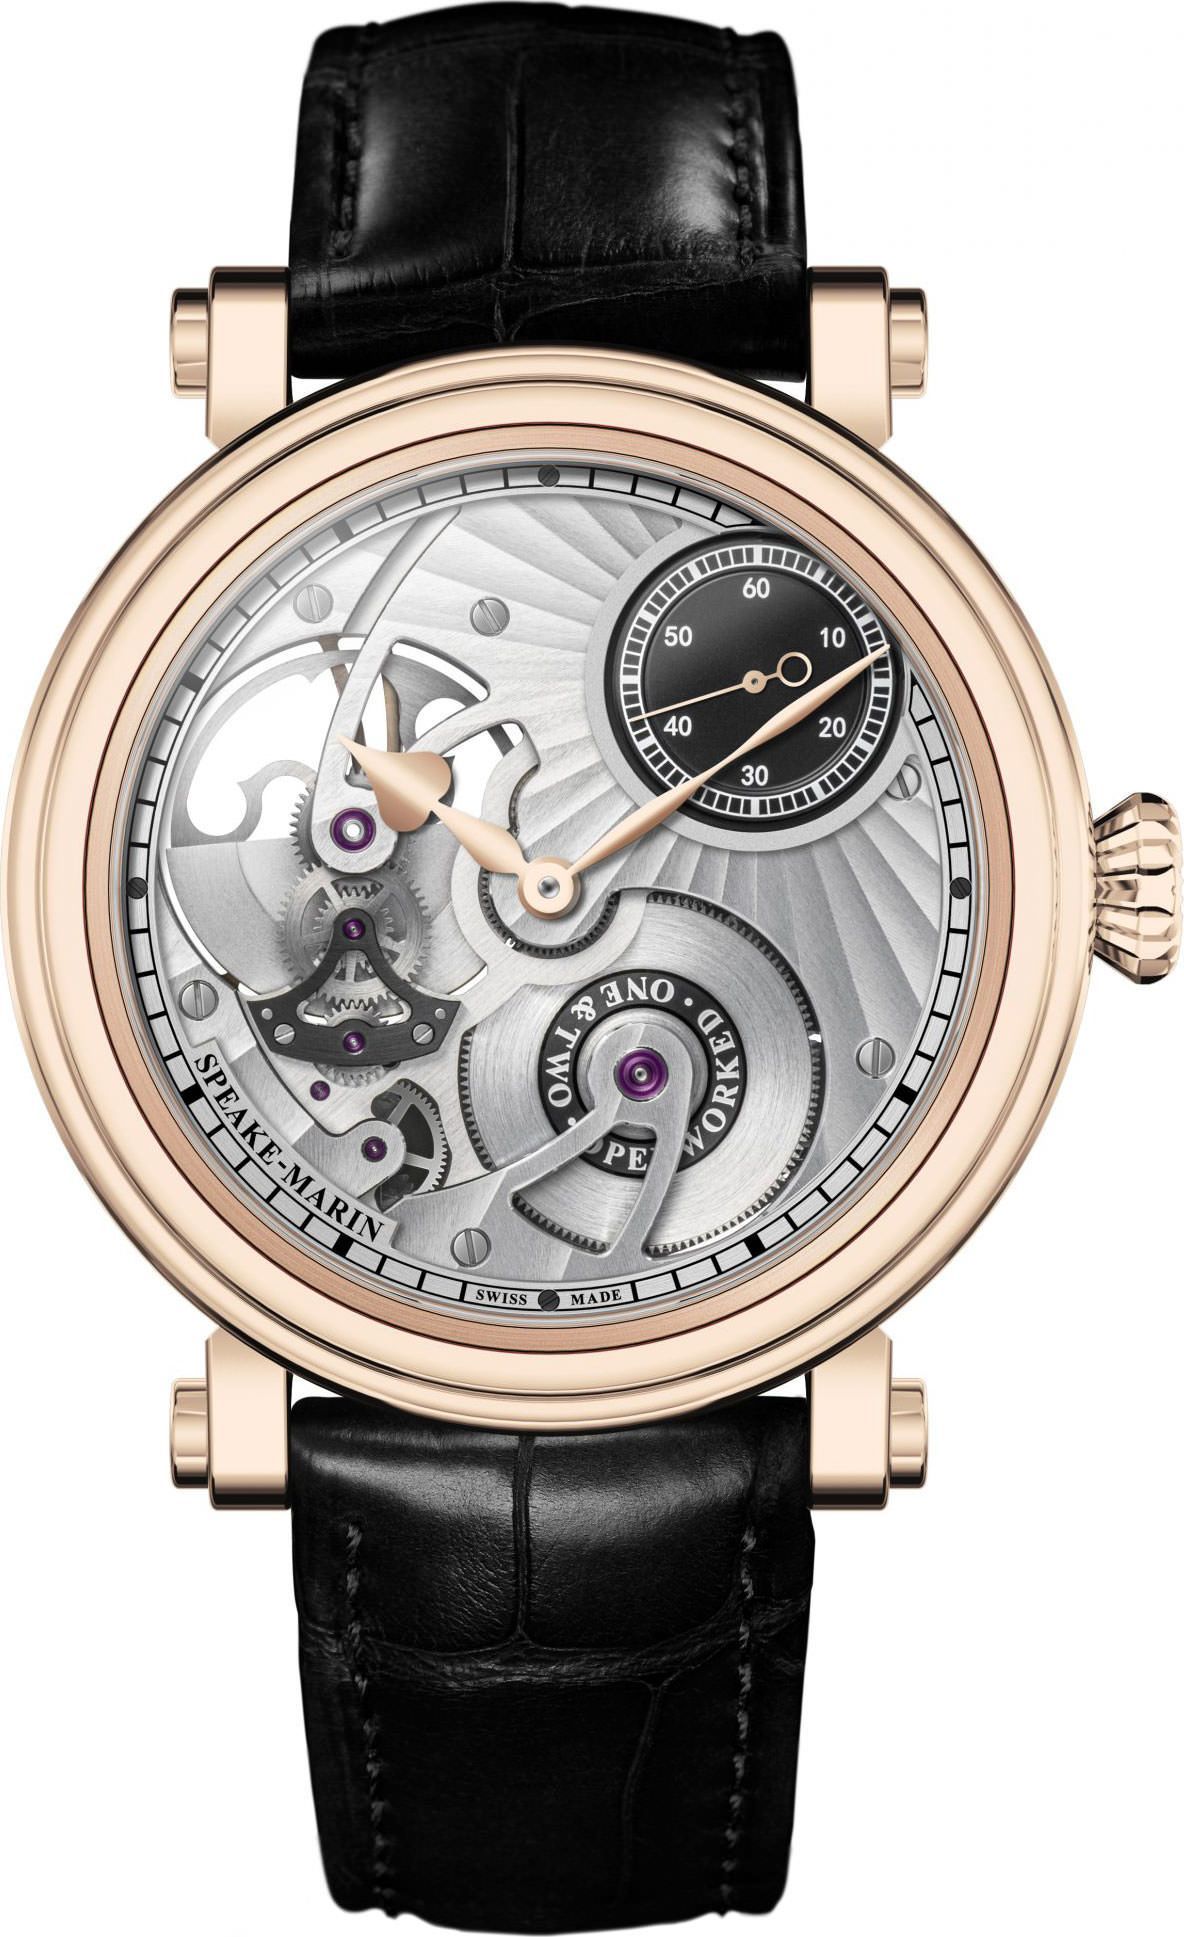 Speake-Marin One & Two Openworked Skeleton Dial 42 mm Automatic Watch For Men - 1